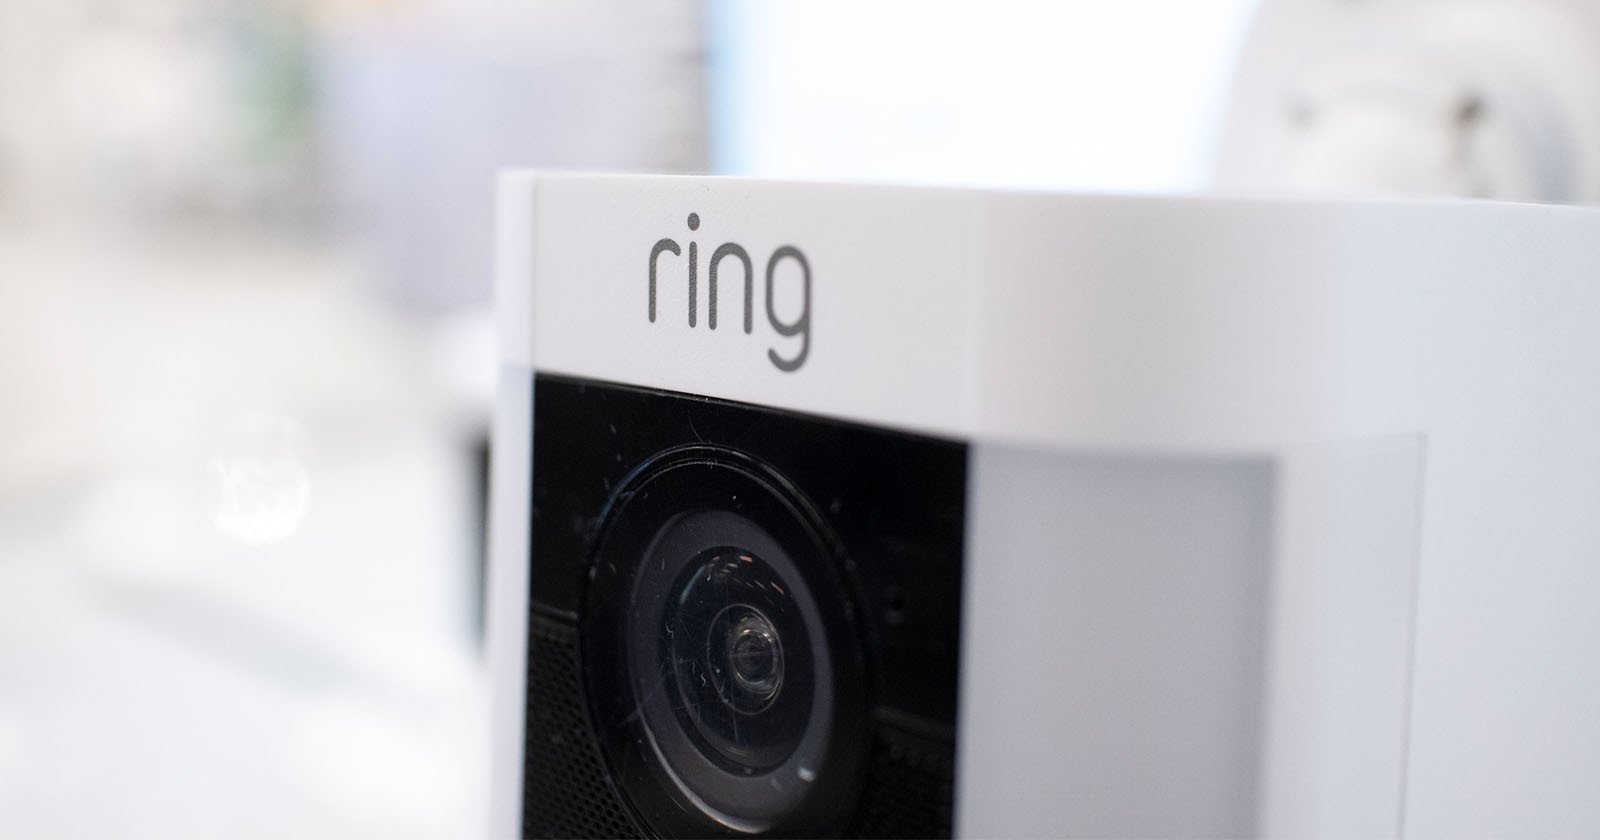 Amazon is Making a Viral Clip TV Show Using Ring Doorbell Footage